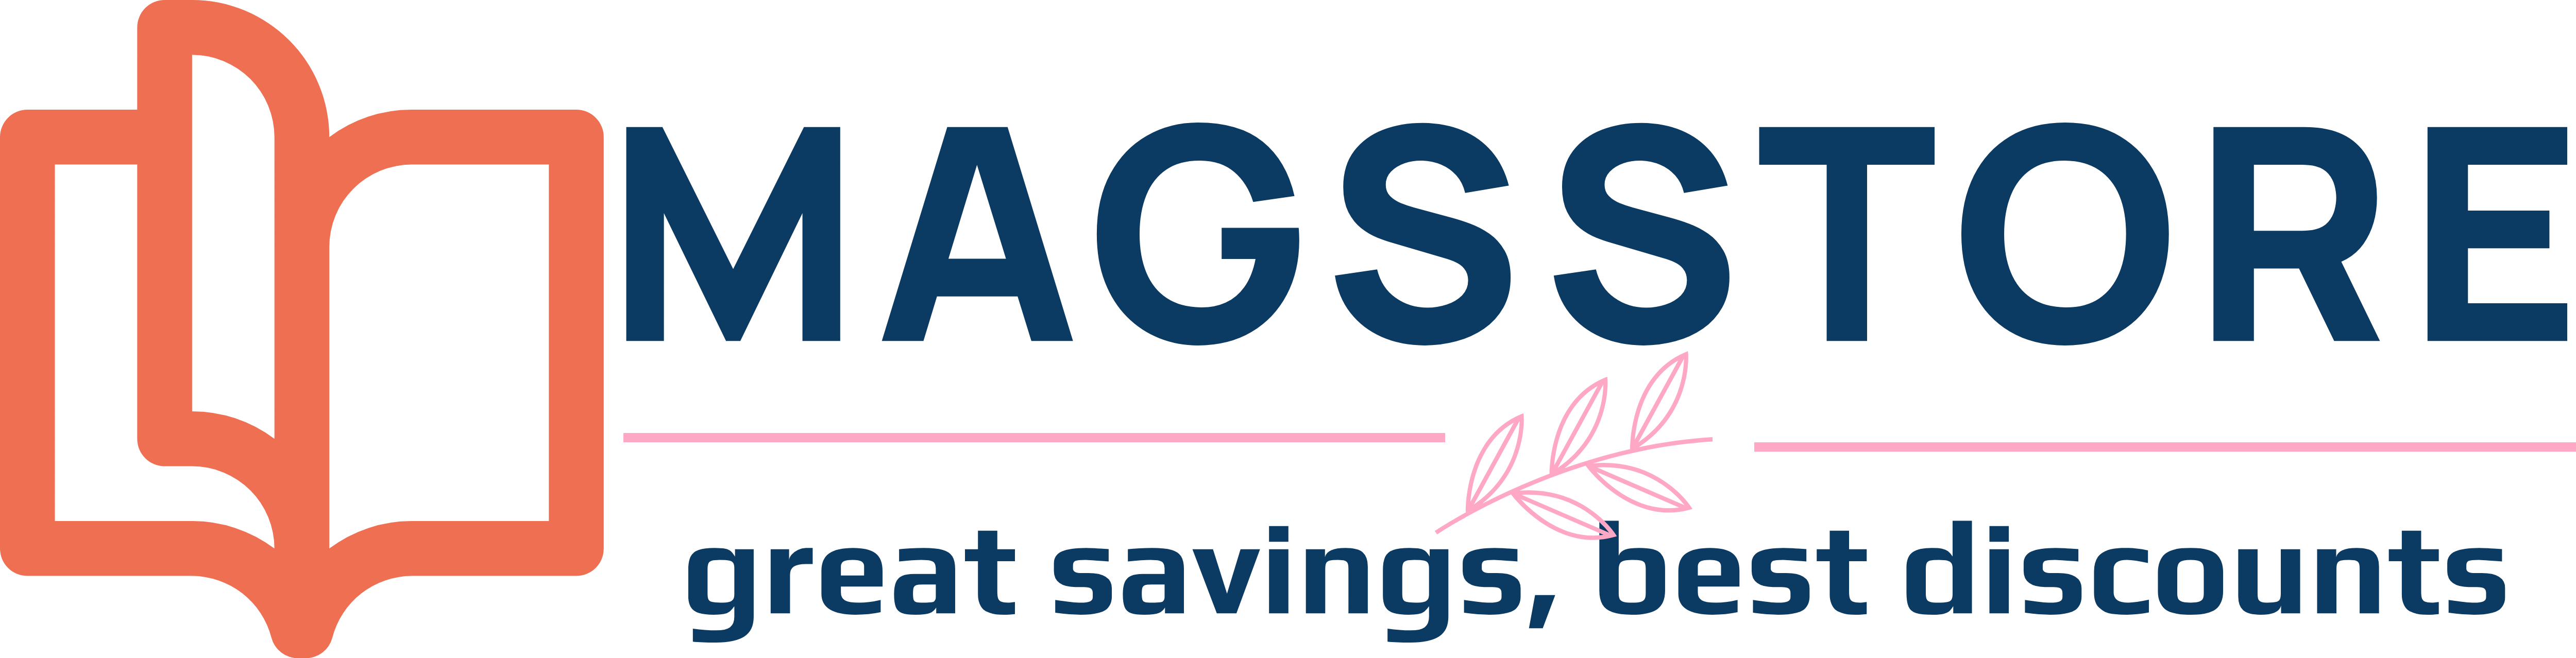 Magsstore